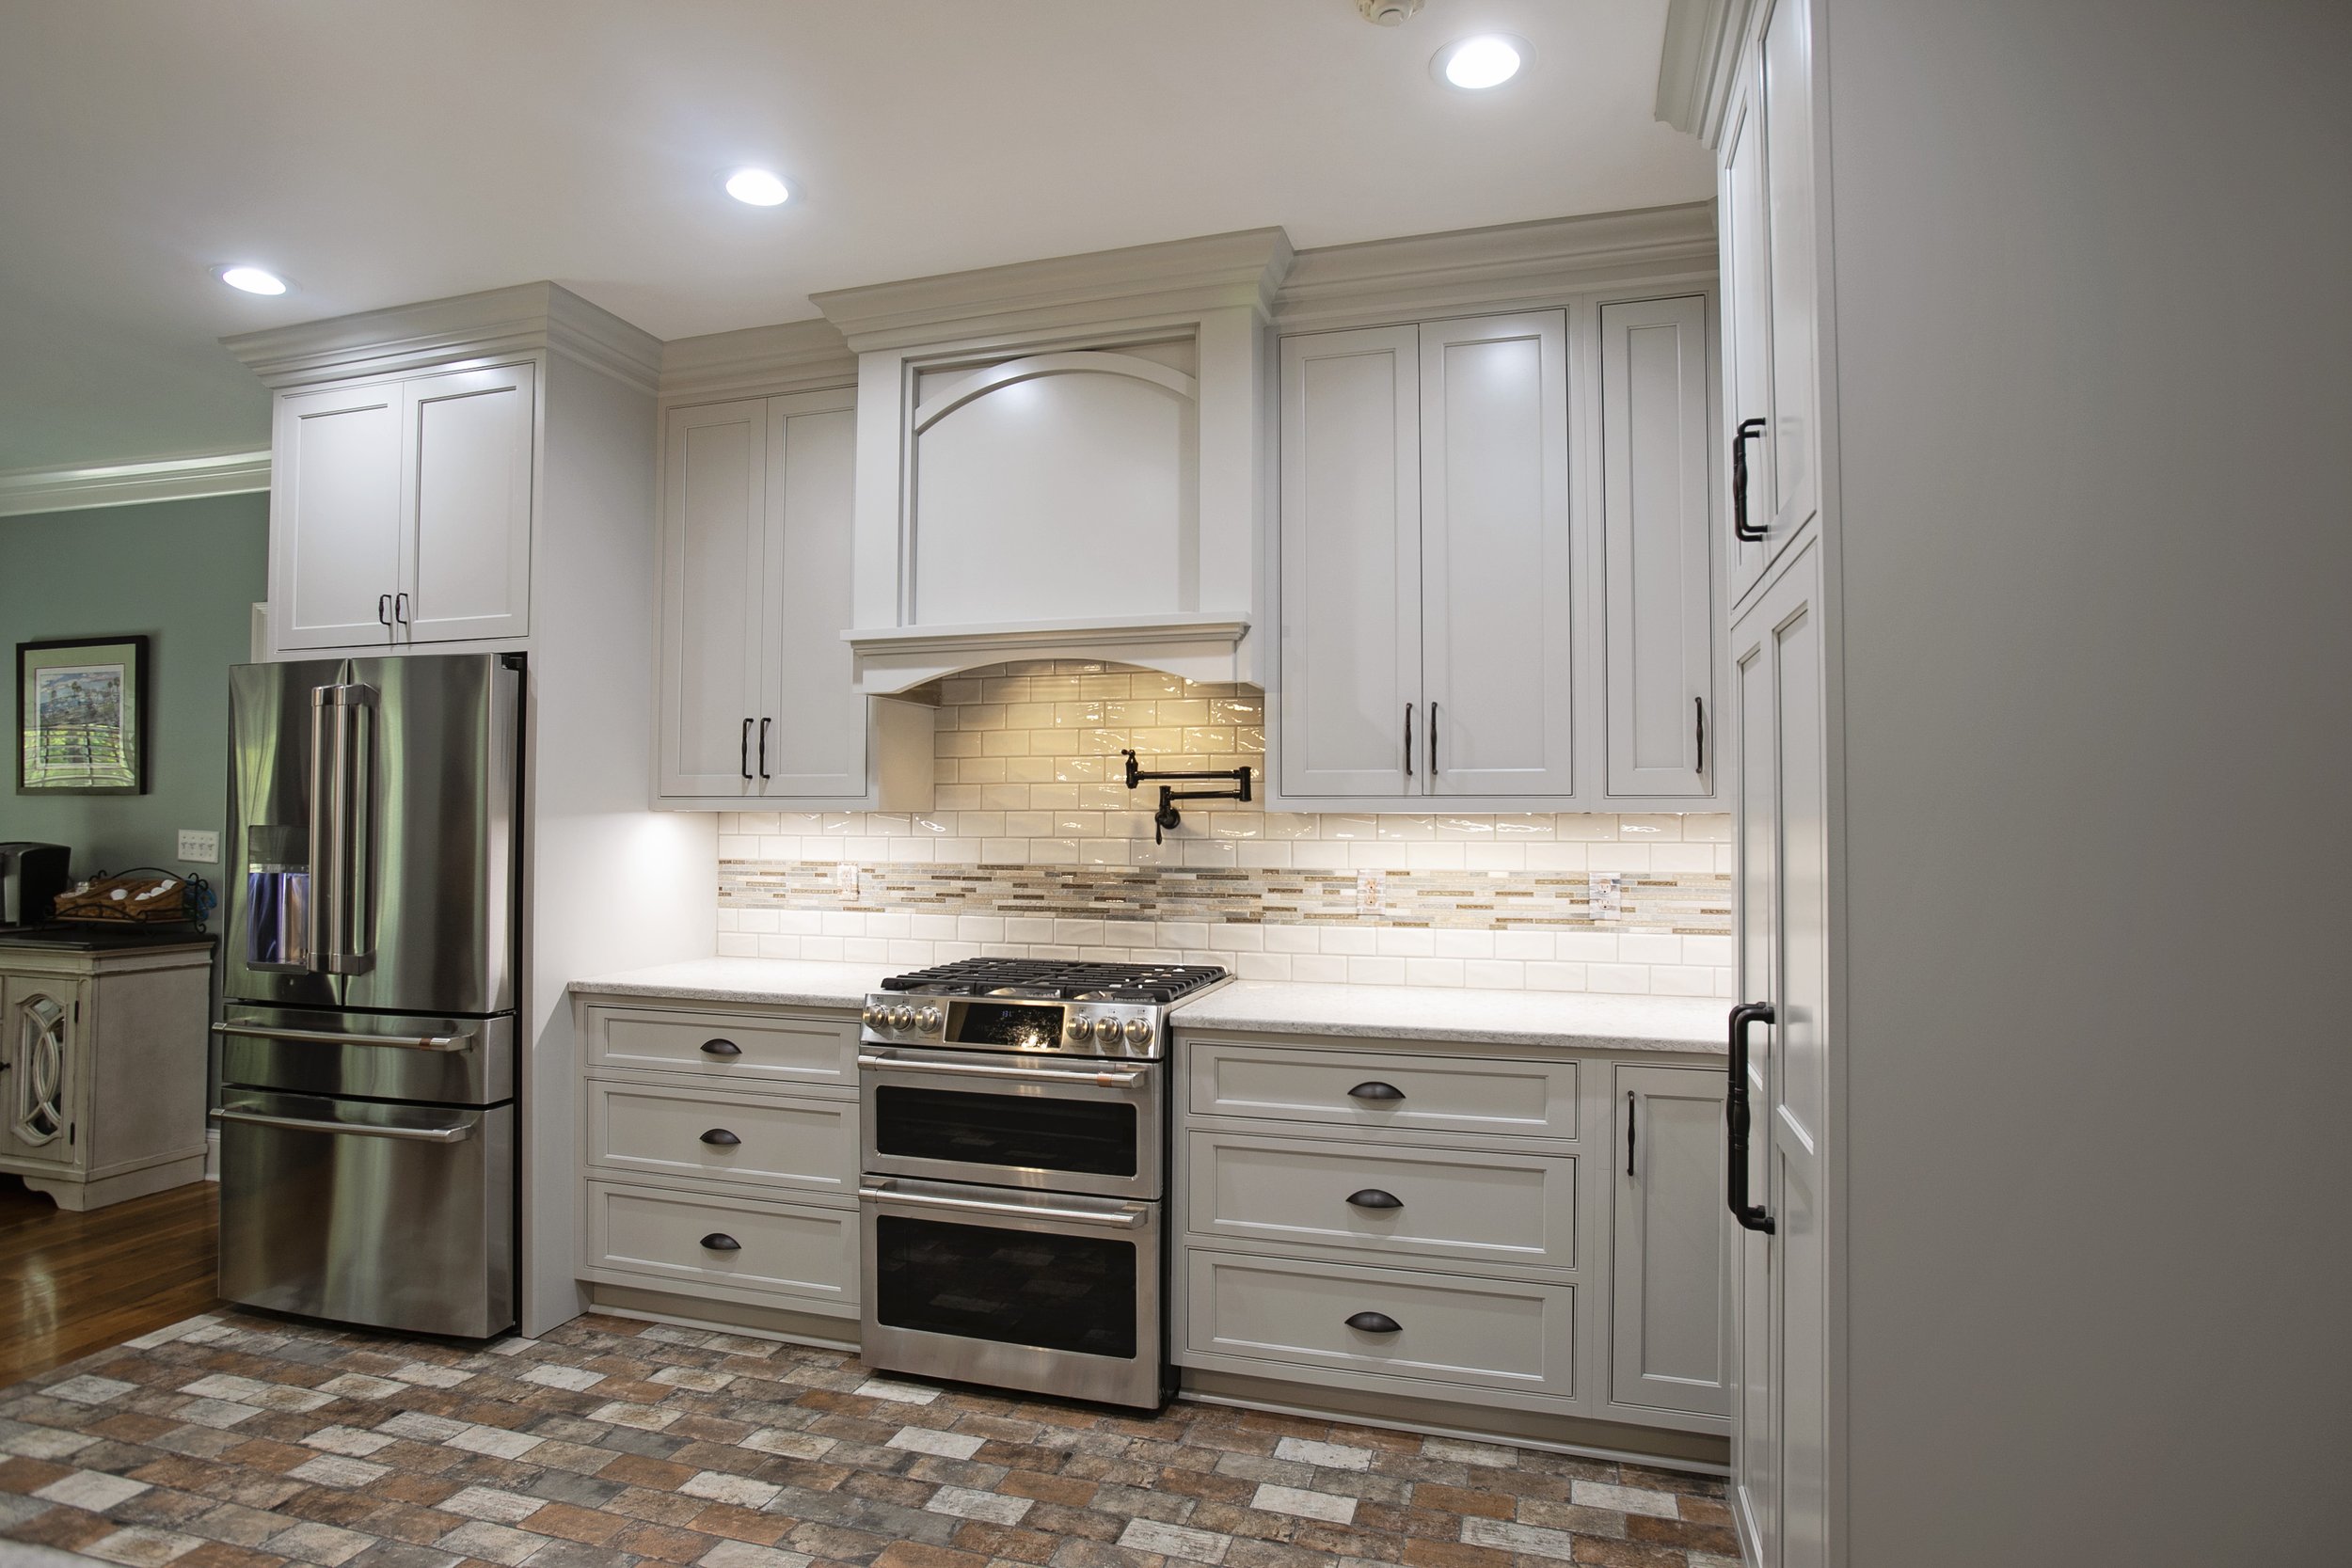 Shiloh Cabinetry in Repose Gray on Cabinets in Leesburg, GA